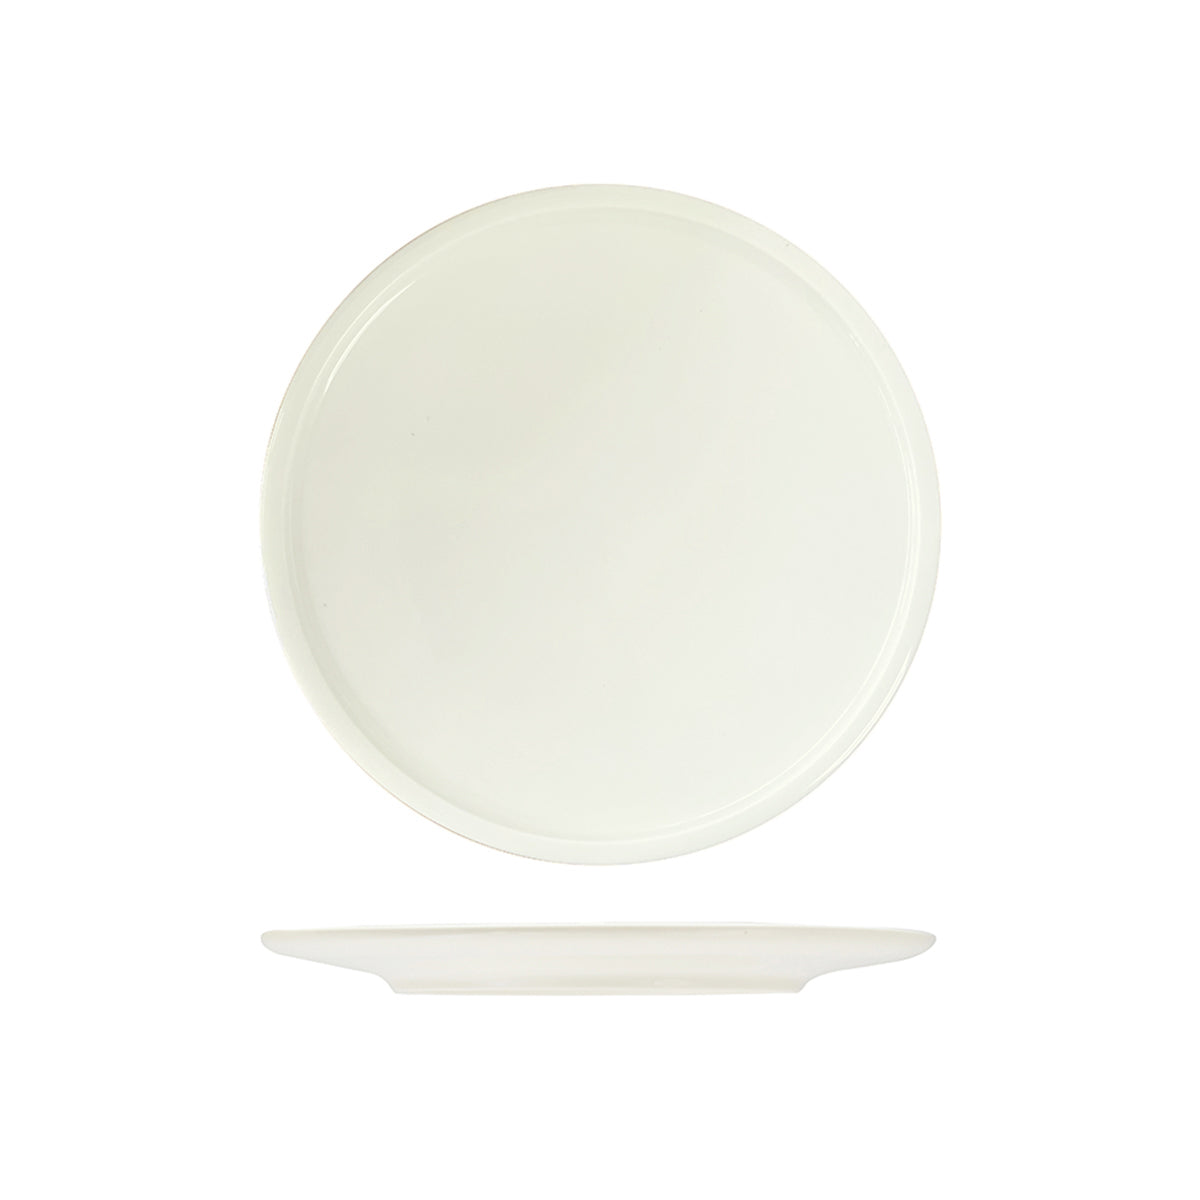 Flat COUPE Plate - 280mm, Ease Ivory